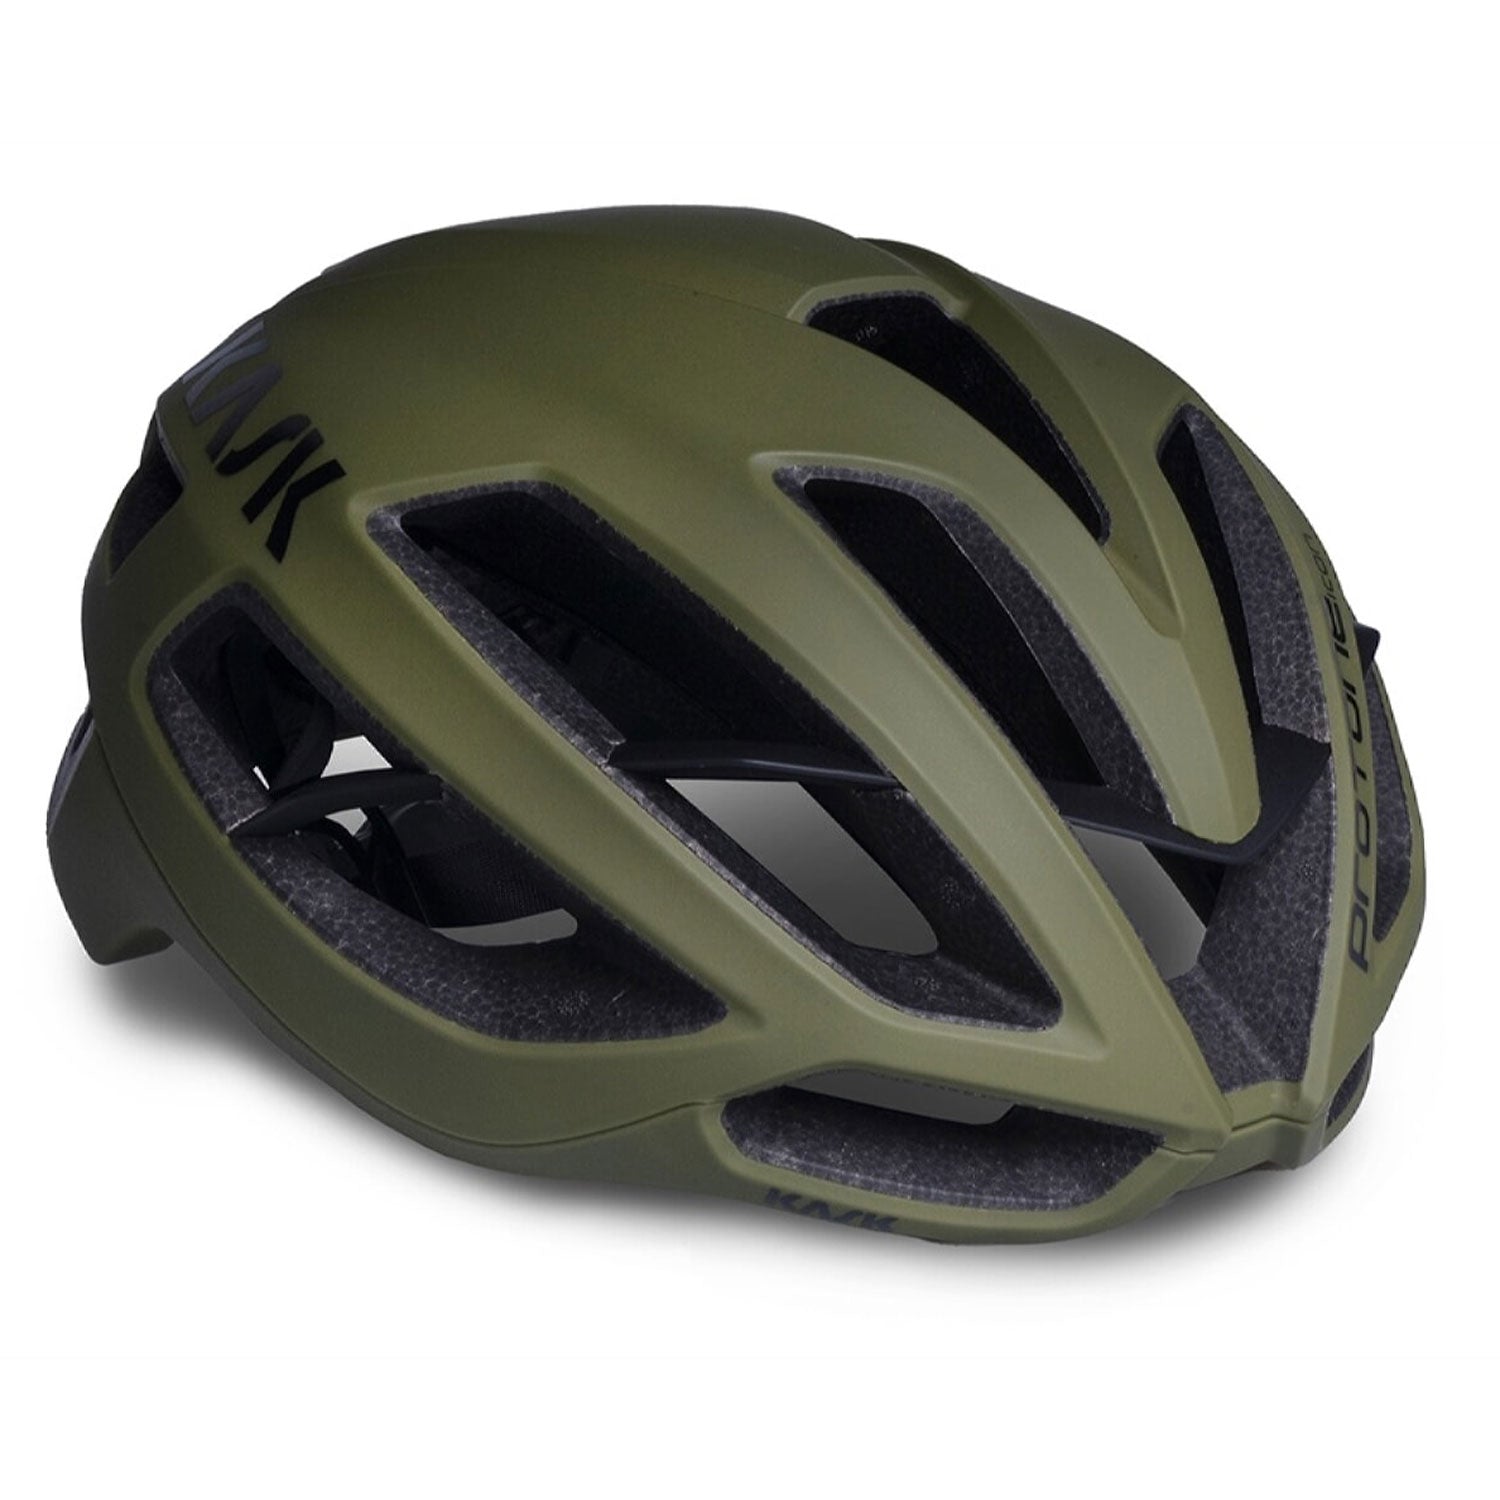 Casco Kask Protone Color Olive Green Mate